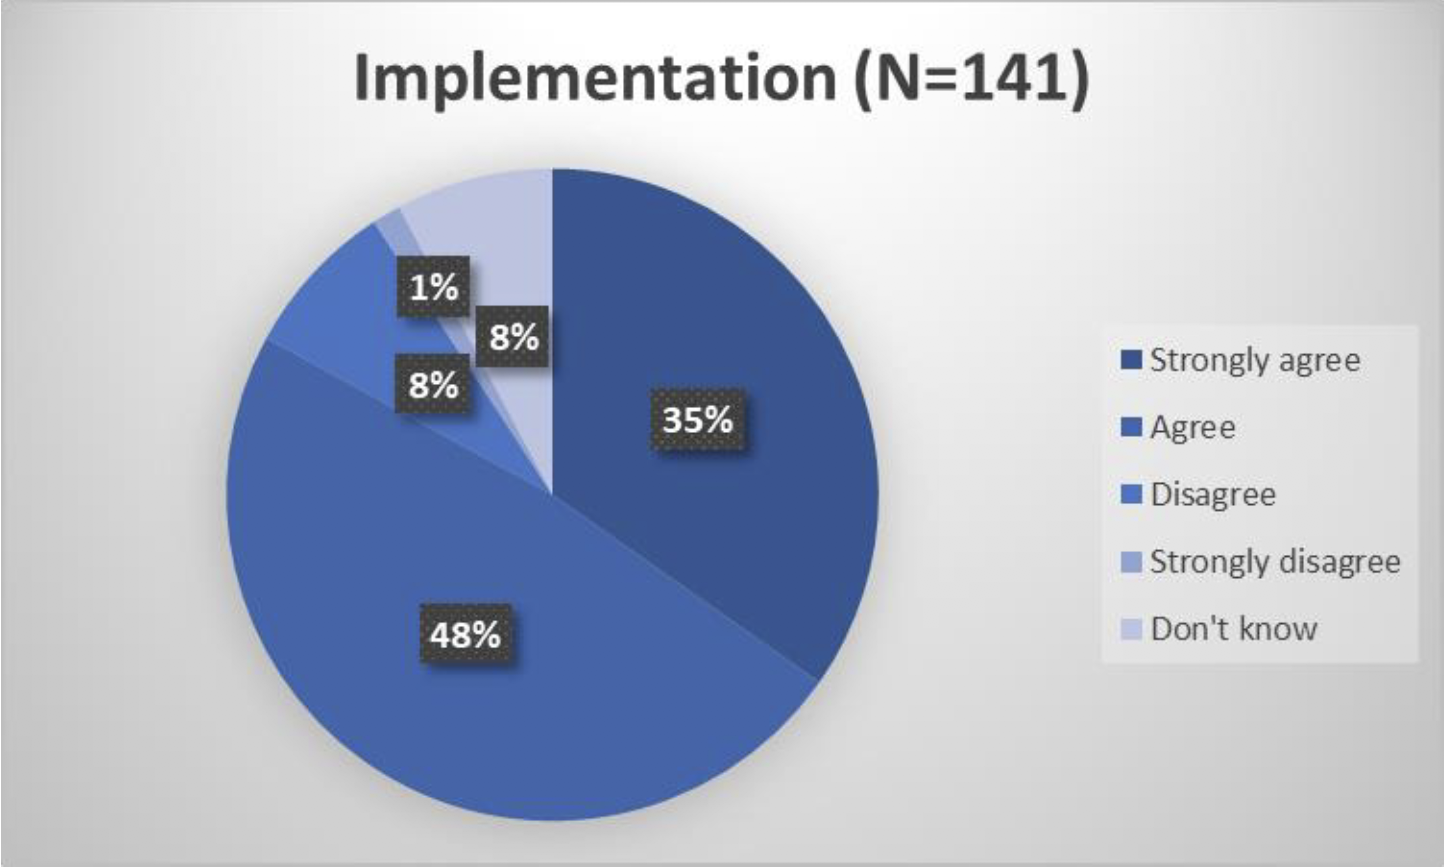 Pie chart showing whether respondents agreed with the suggested approach for implementation of the Guidance:
Strongly agree 35%
Agree 48%
Disagree 8%
Strongly disagree 1%
Don't know 8%